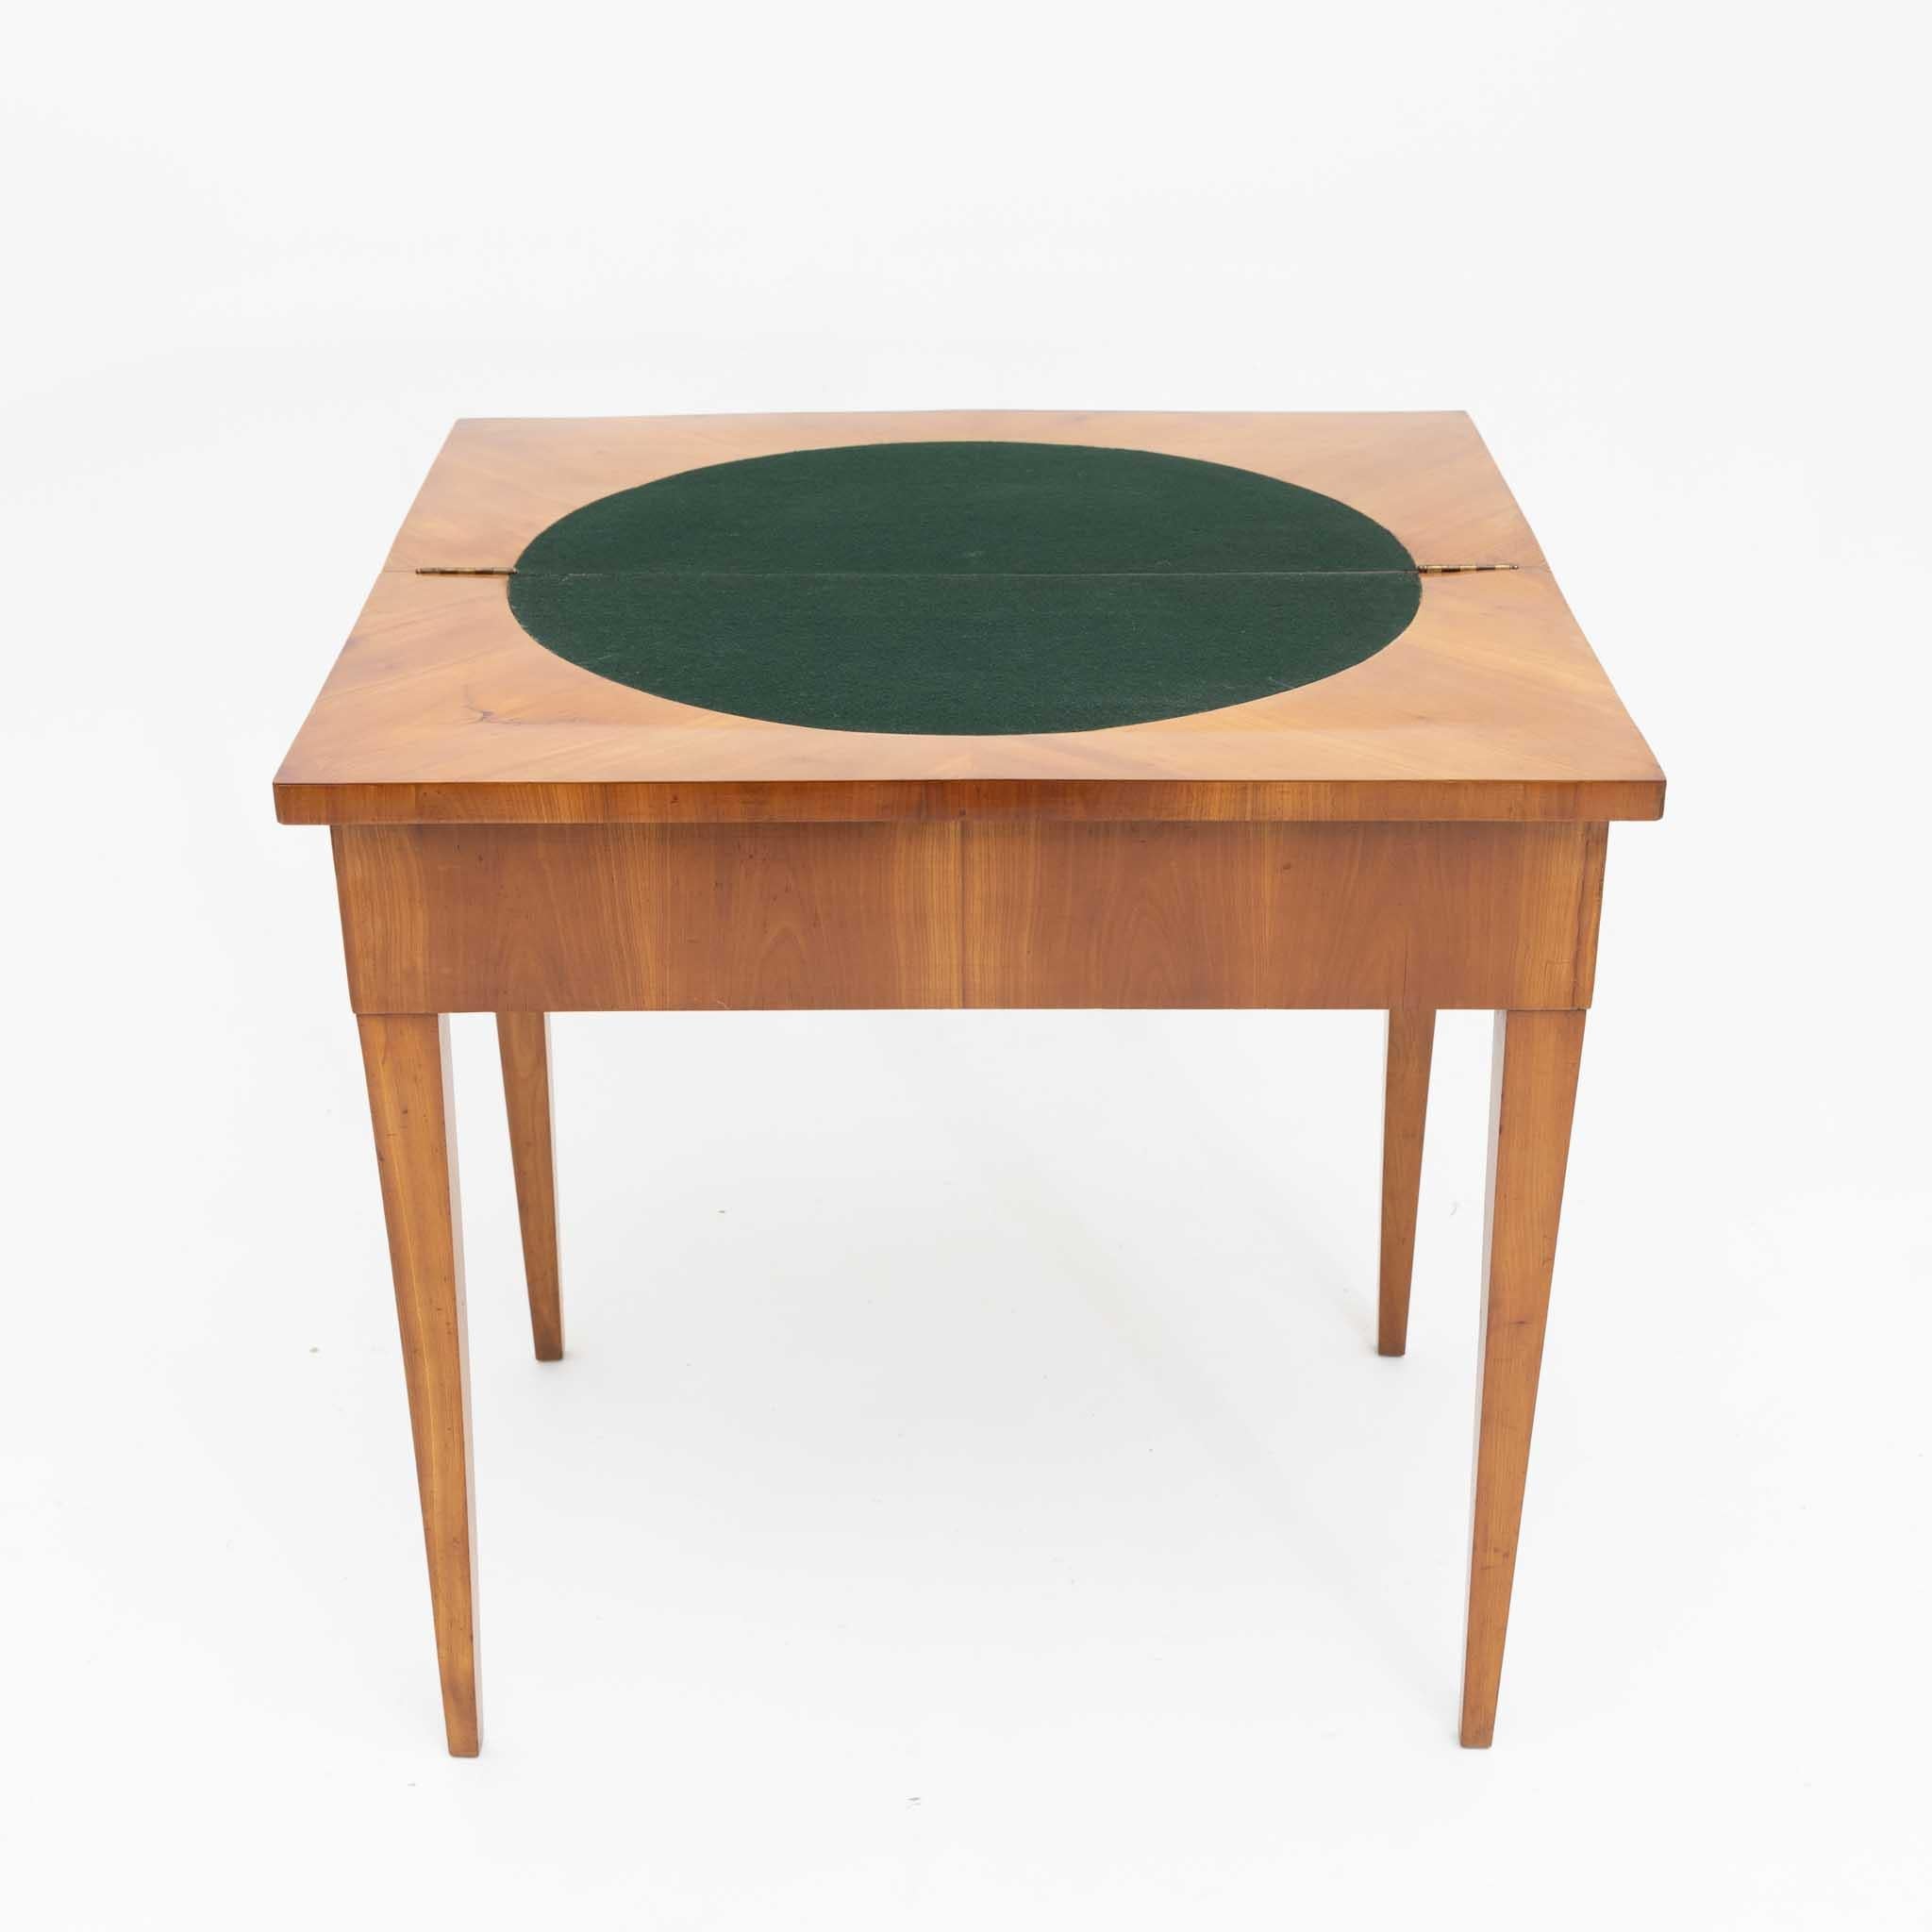 Wood Game Table in Cherry Around 1820 For Sale